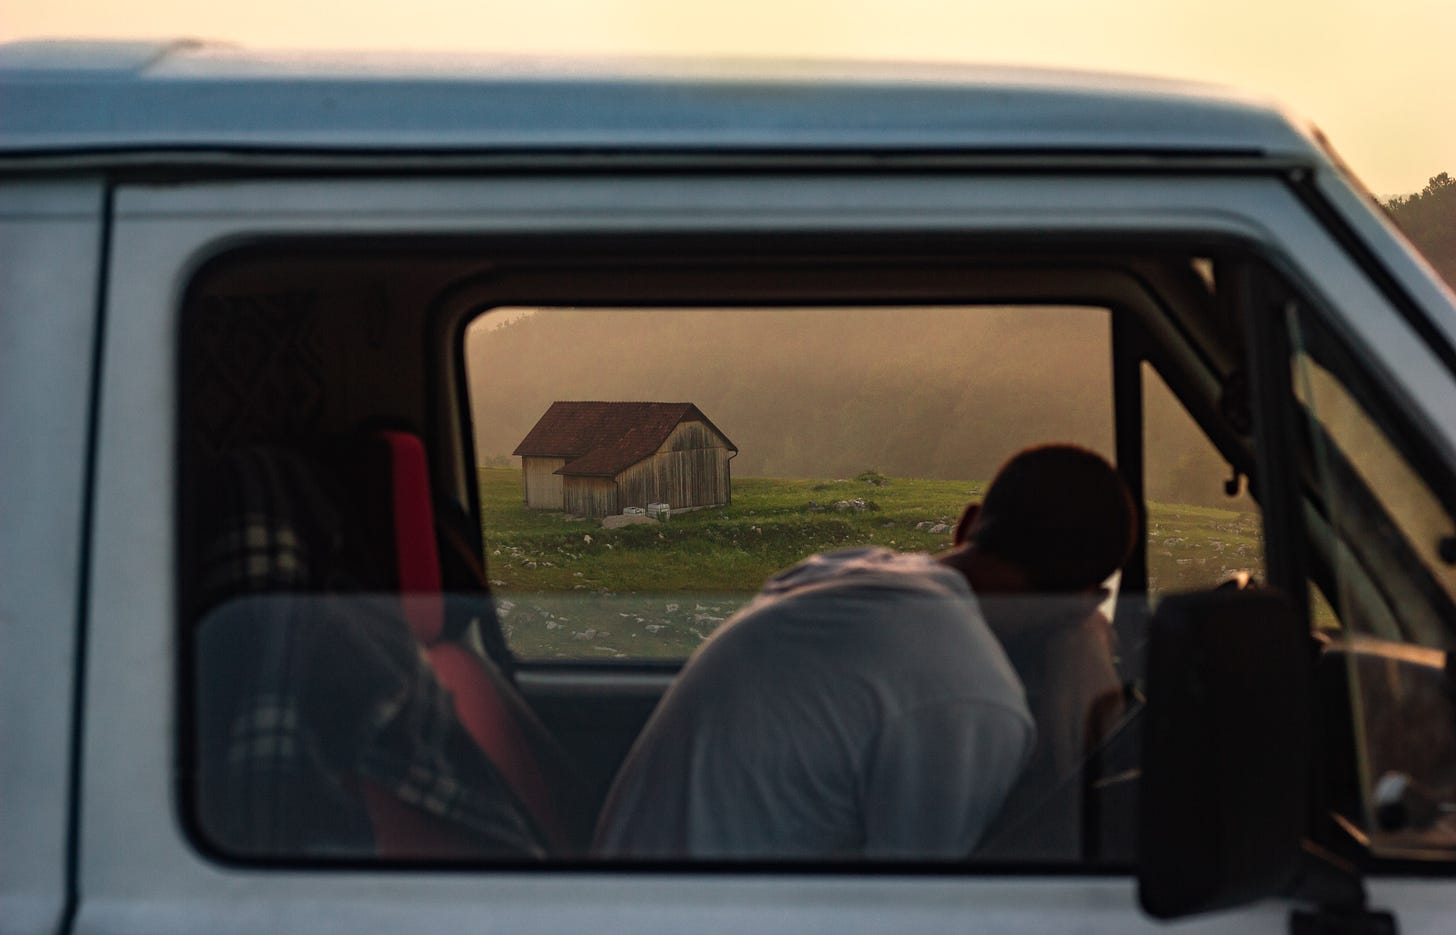 A close up of the window of a van, a man lying his head on the wheel. In the background is a lonely small wooden cabin surrounded by stunning scenery.